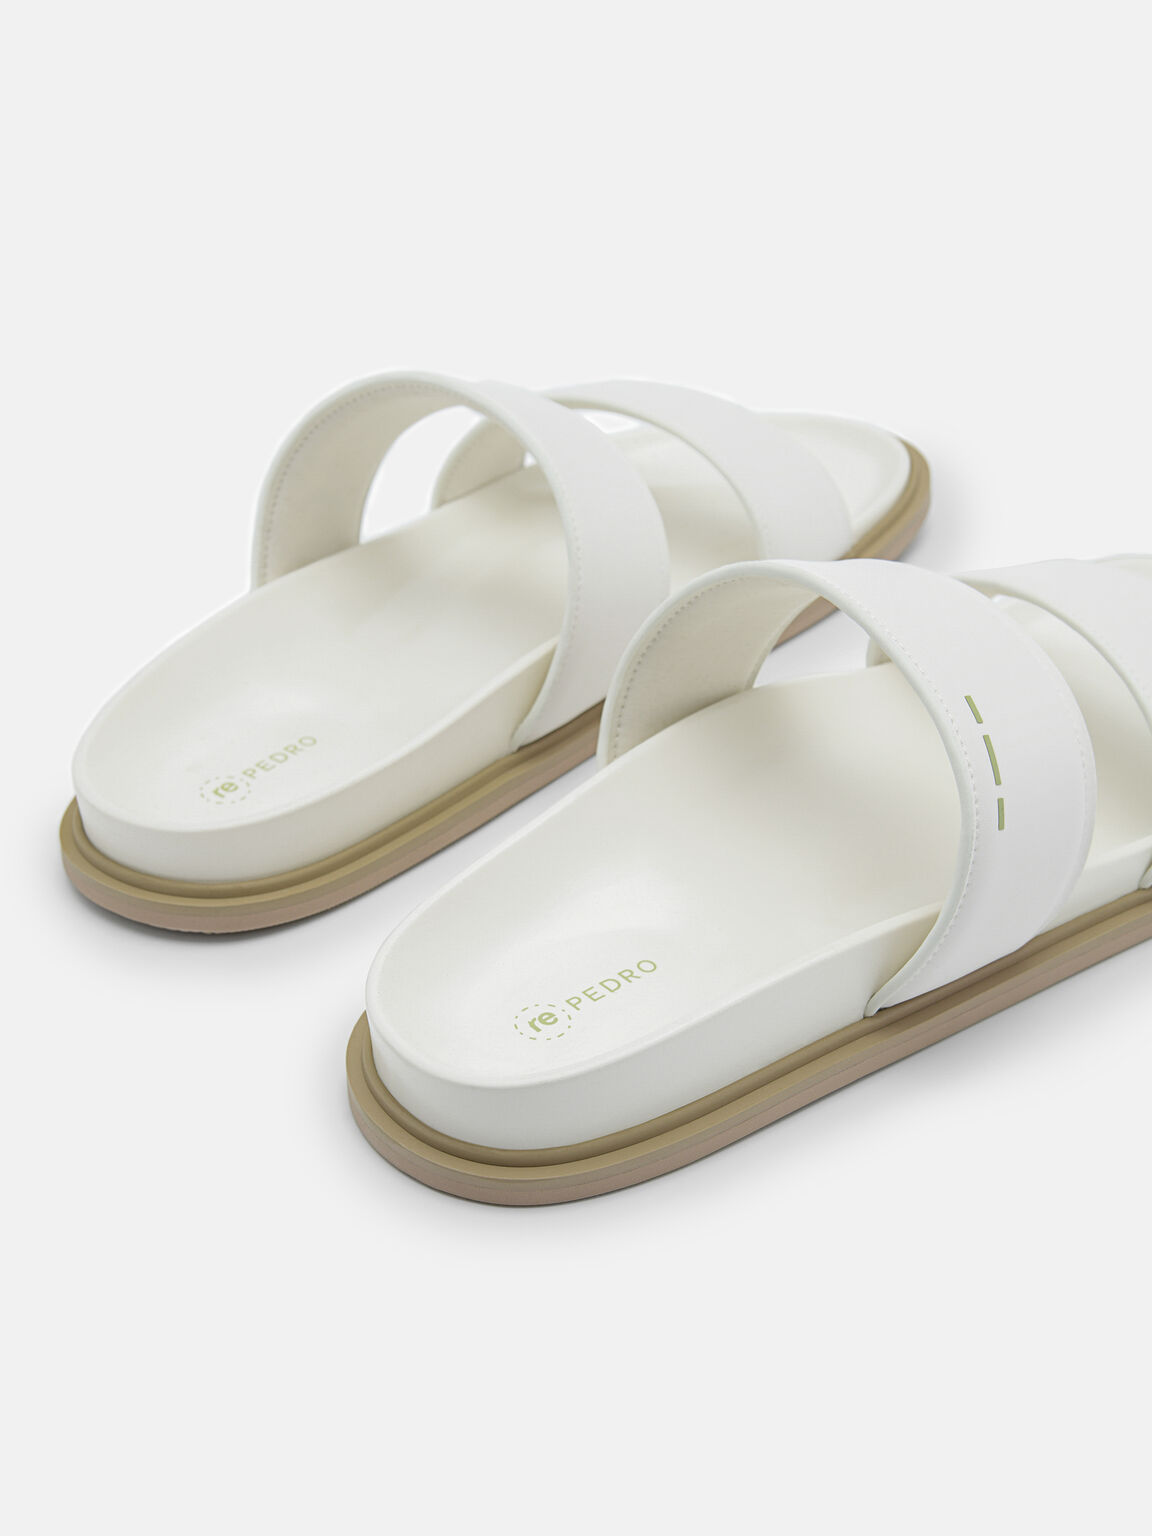 White rePEDRO Recycled Leather Slide Sandals - PEDRO MY